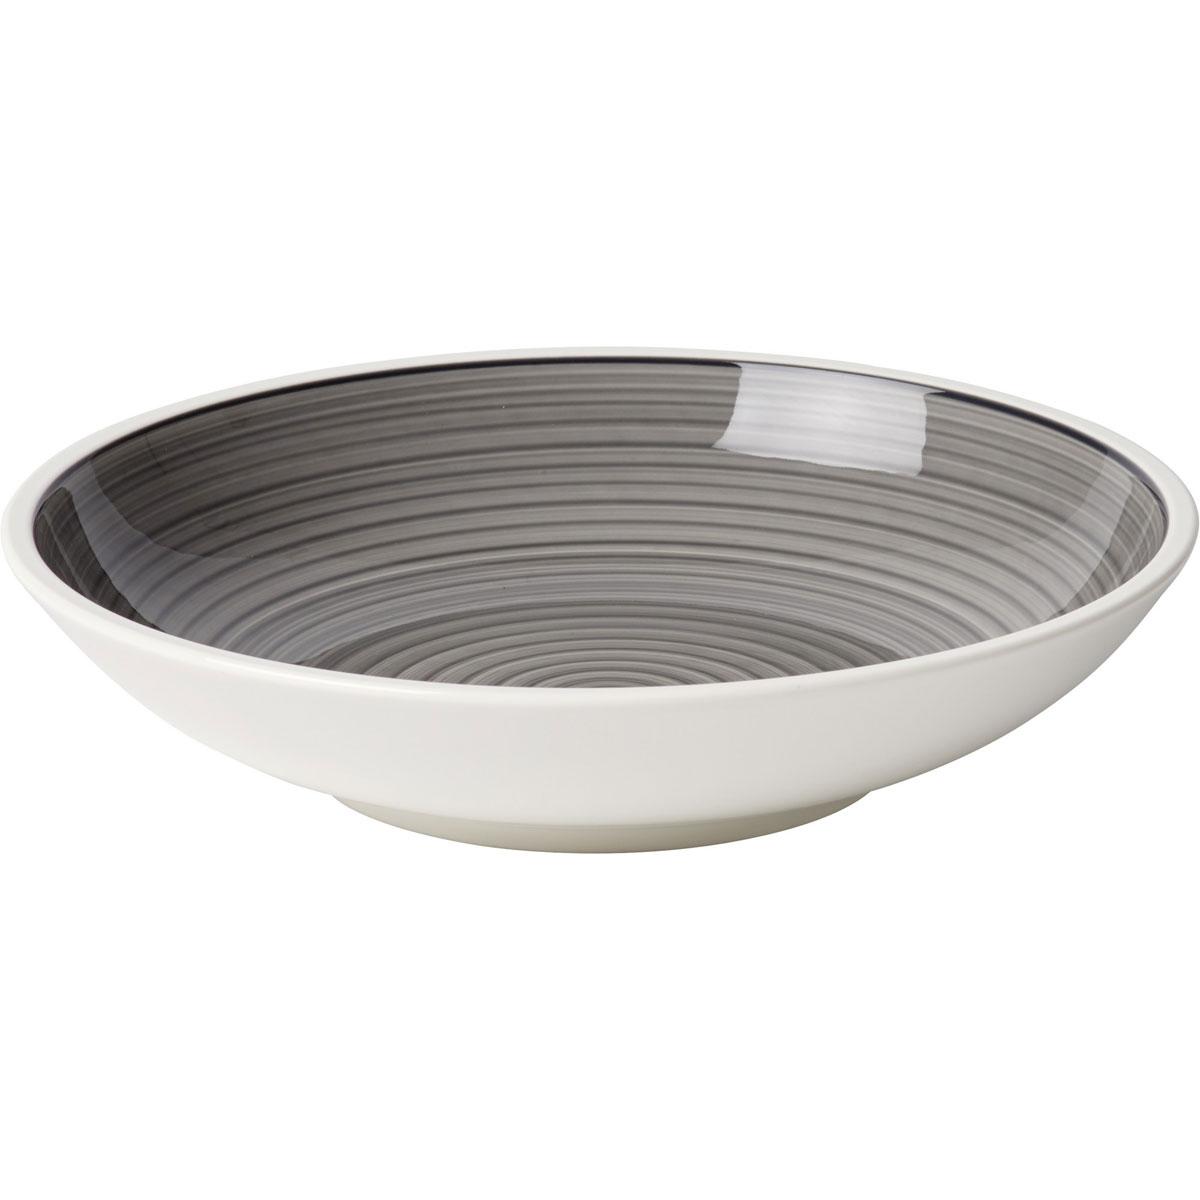 Villeroy and Boch Manufacture Gris Individual Pasta Bowl